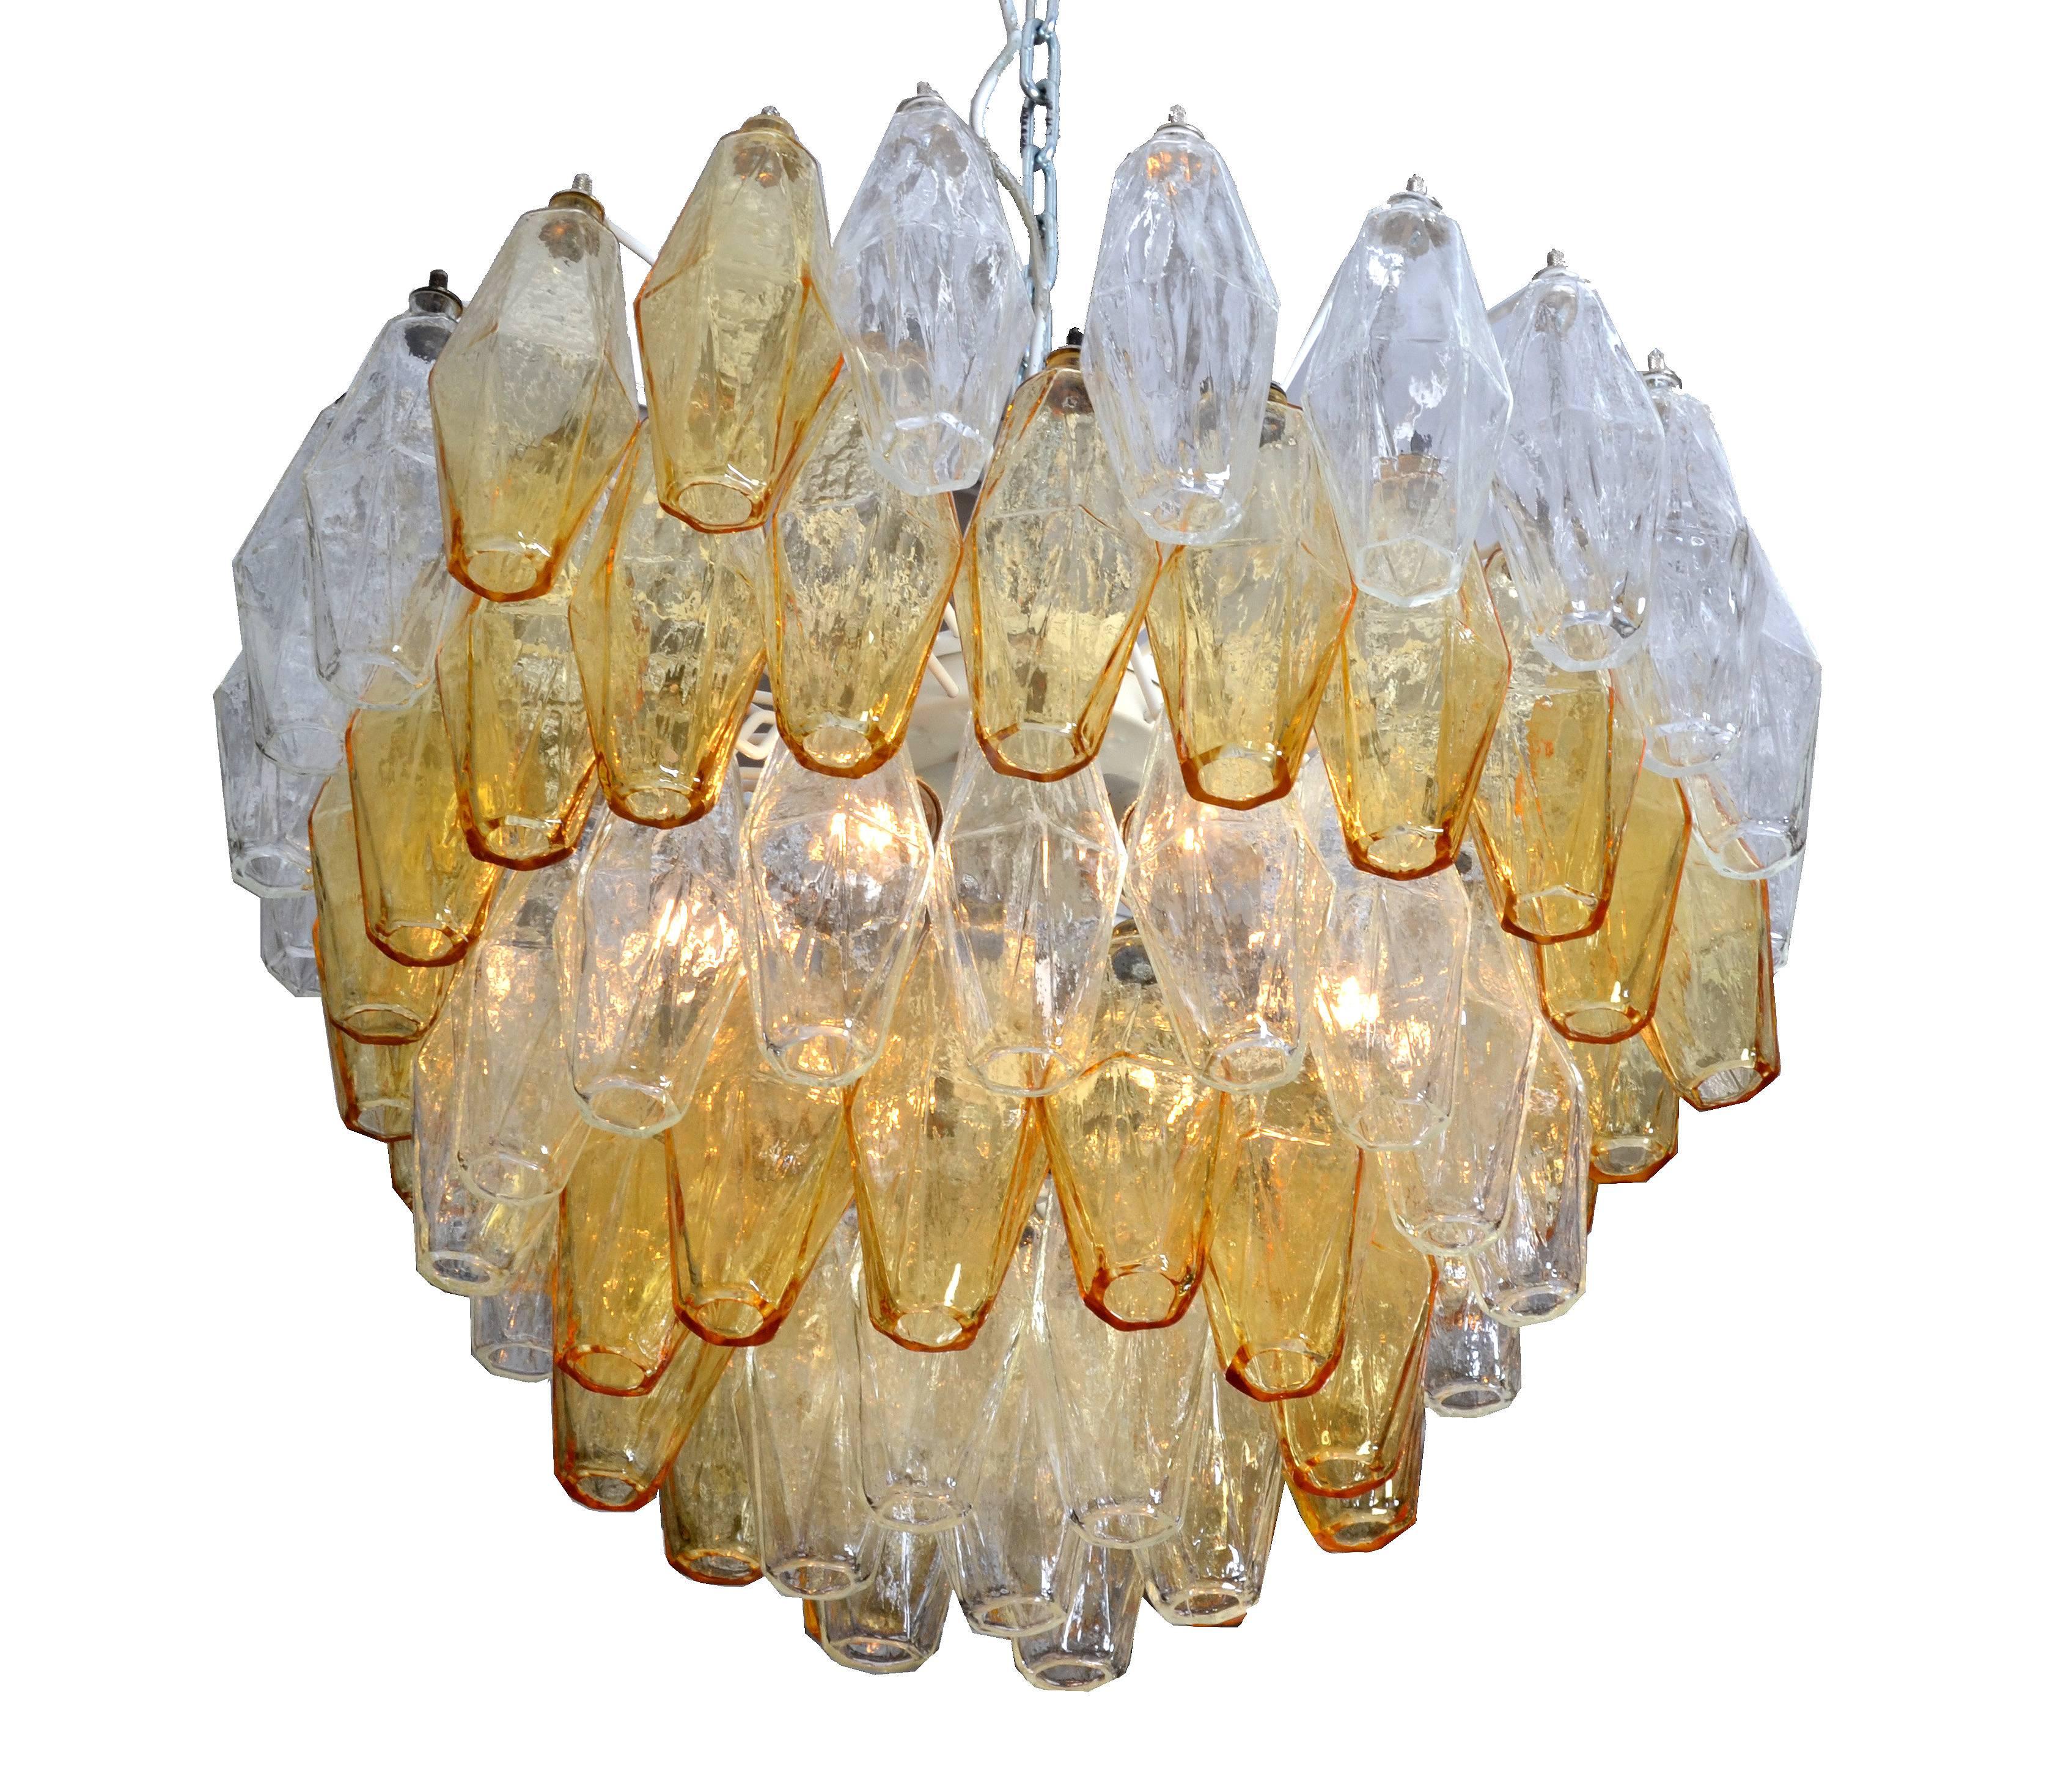 Chandelier by Carlo Scarpa for Venini with five layers of polyhedral blown glass ornaments.